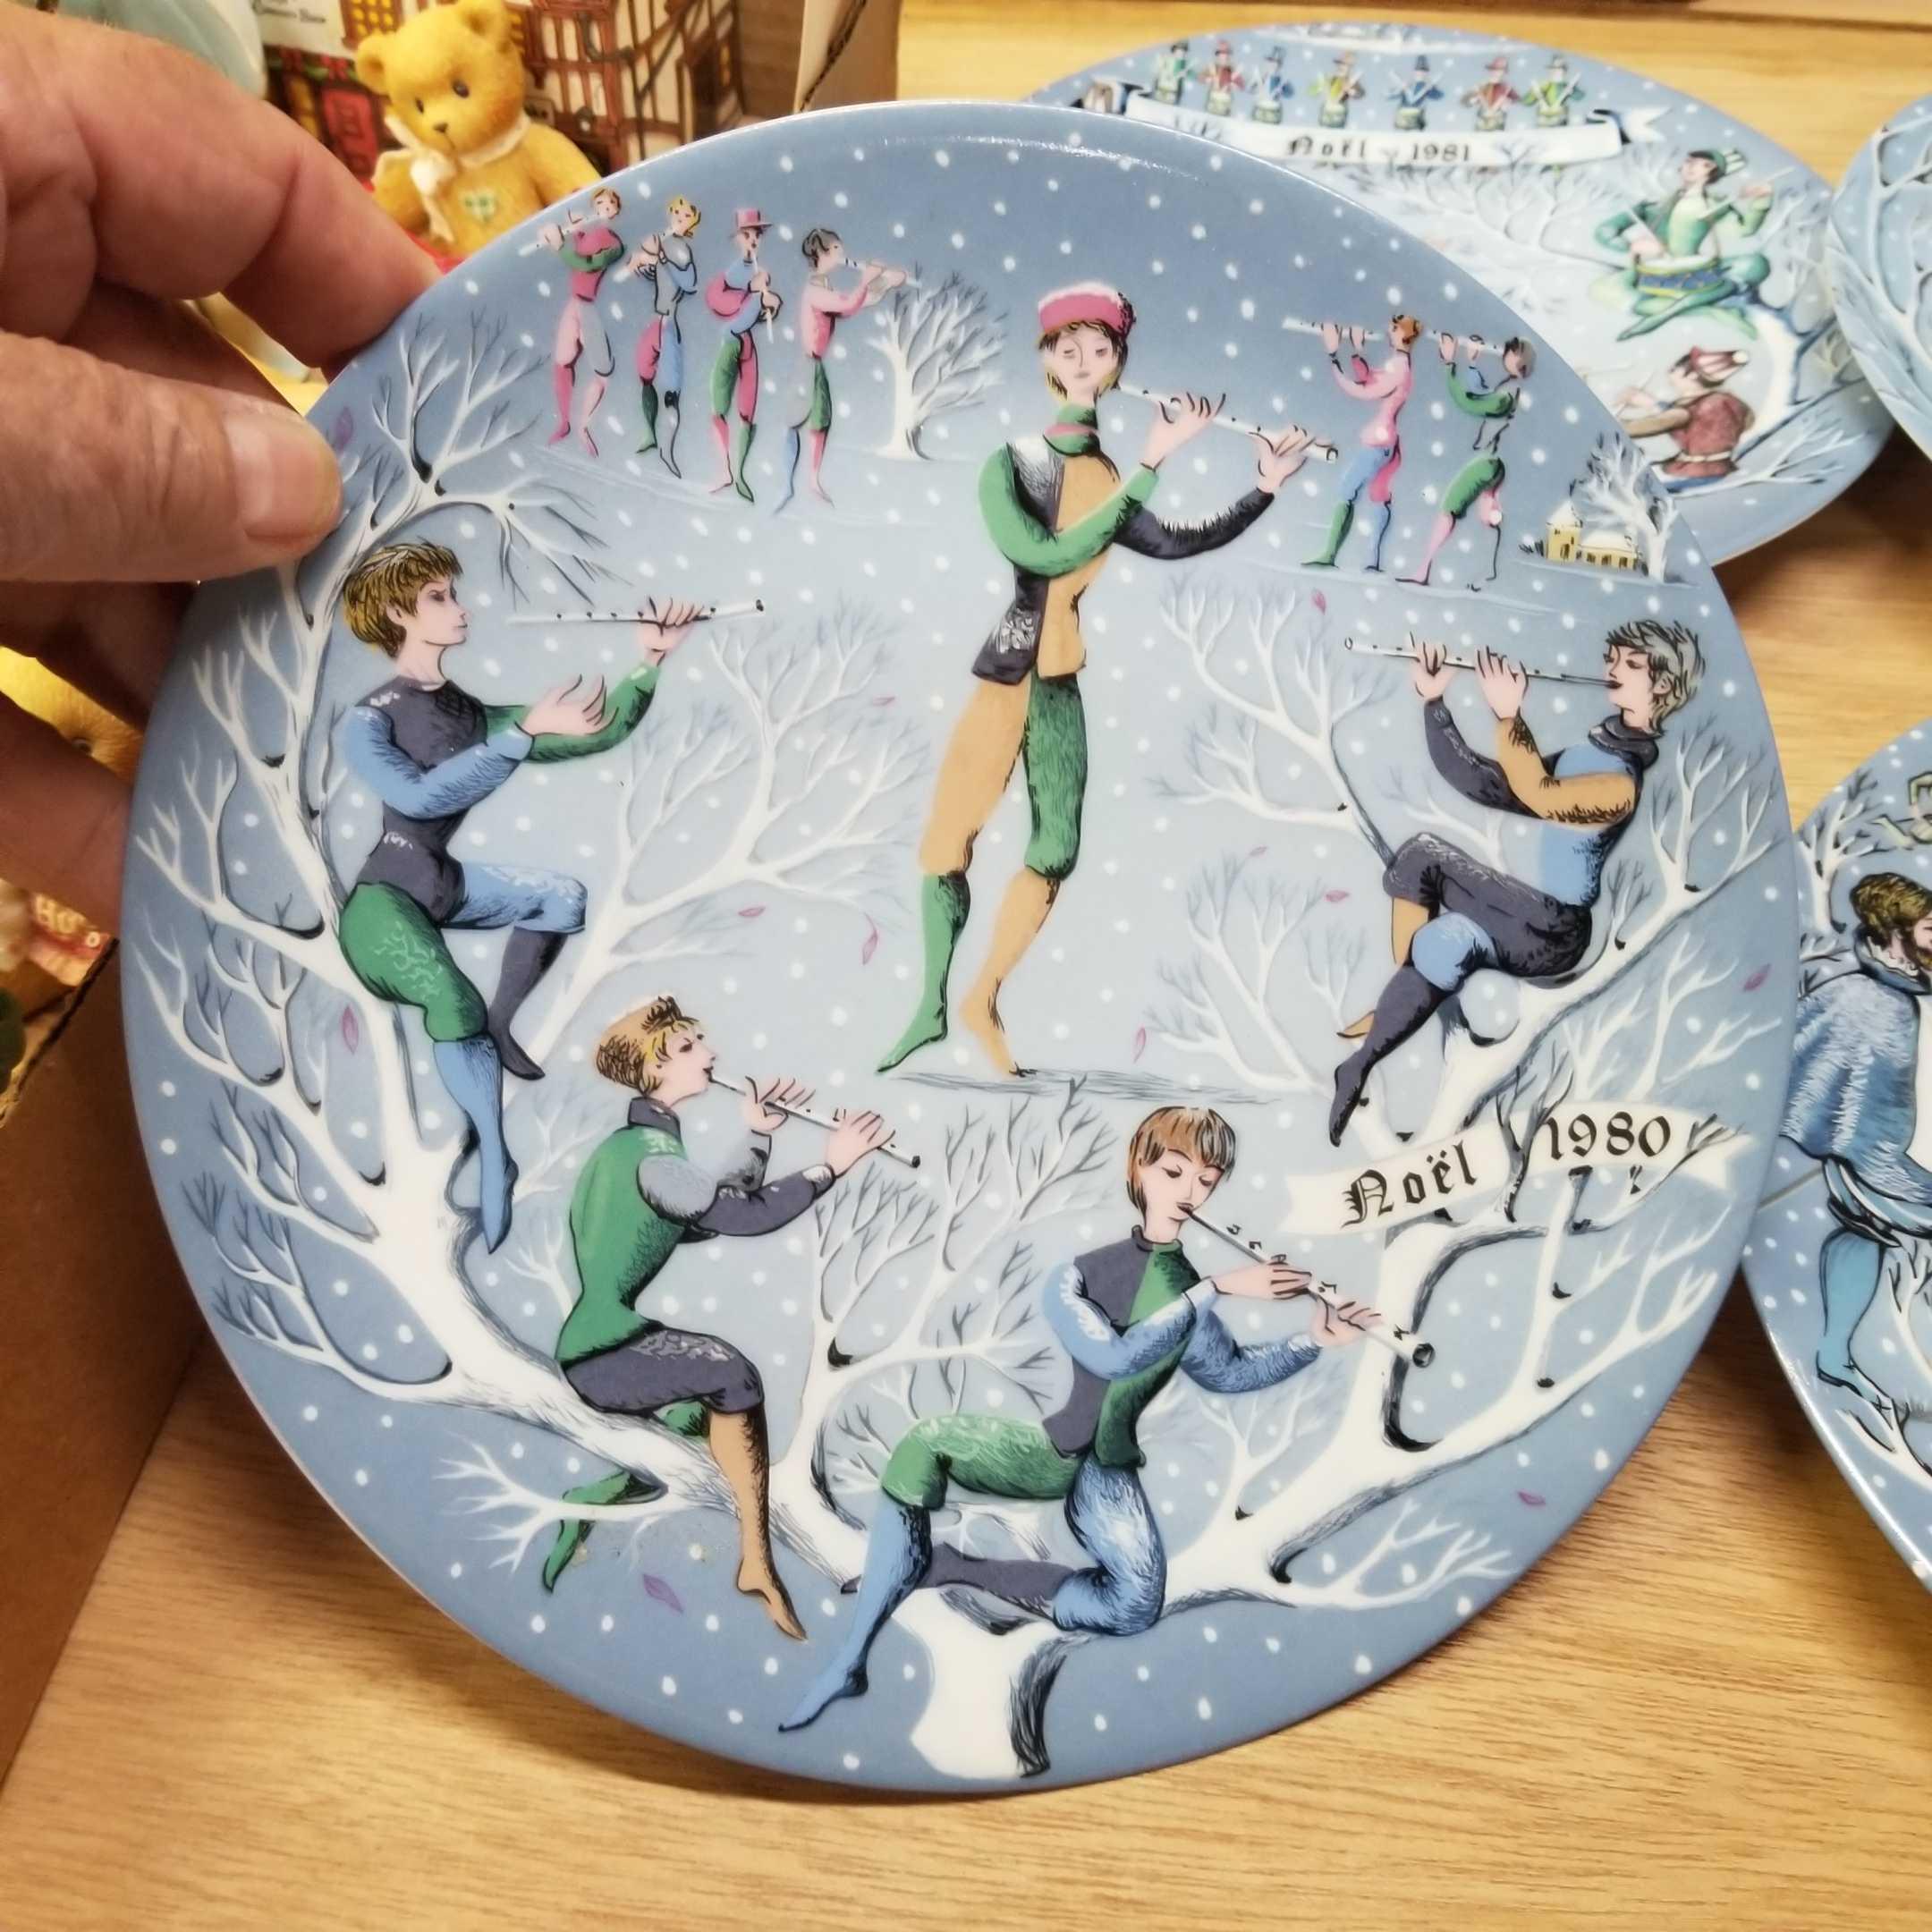 HAVILAND "12 DAYS of CHRISTMAS" COLLECTOR PLATES